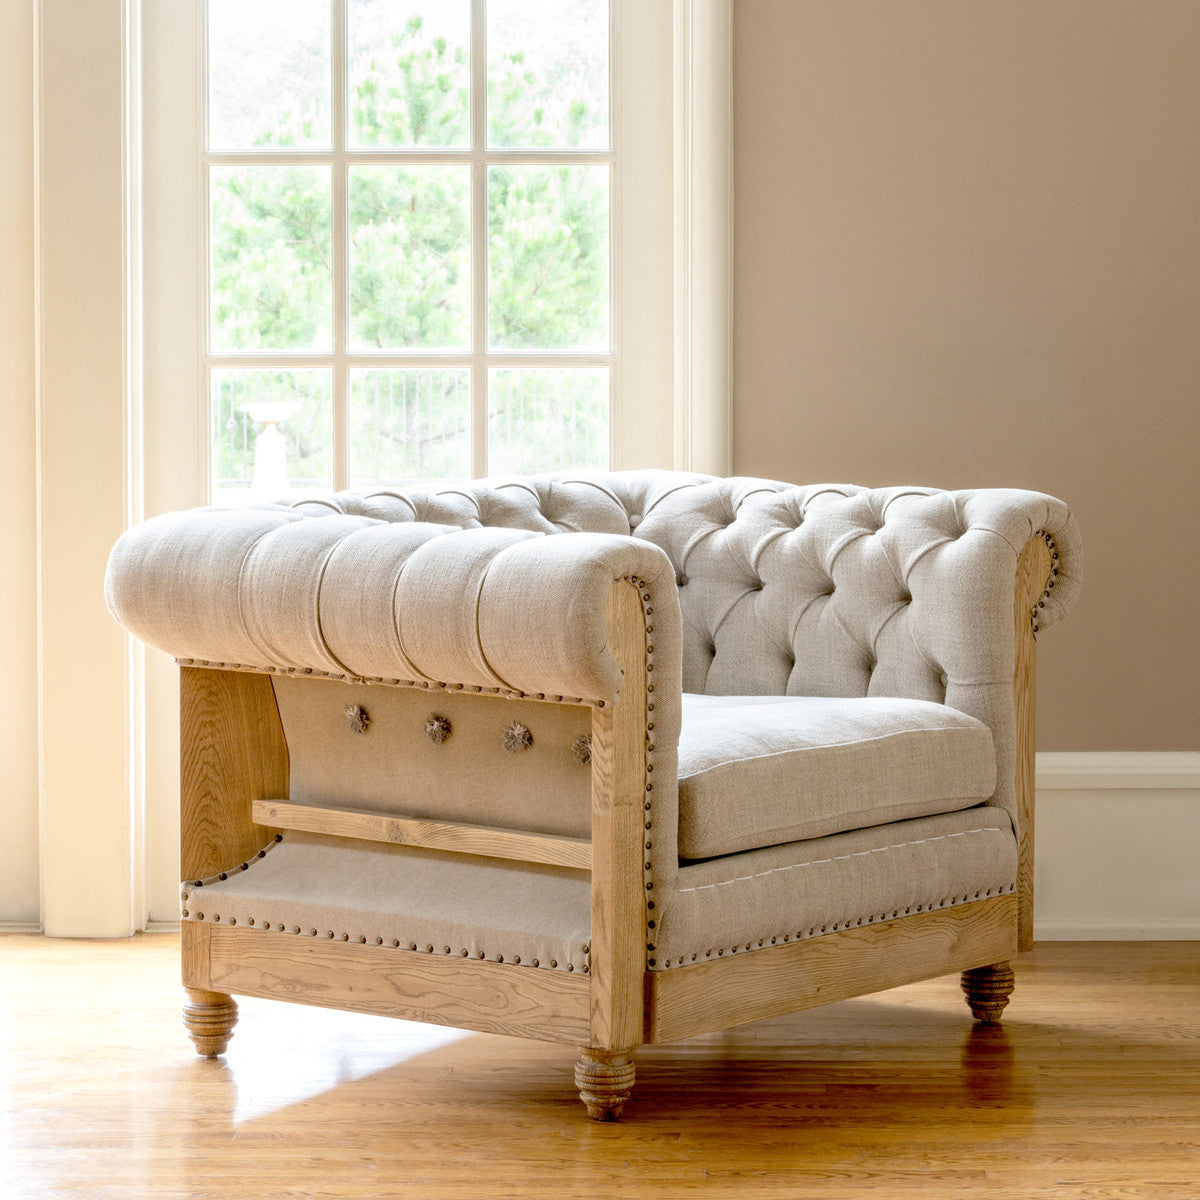 Hillcrest chesterfield chairs for sale, Park Hill tufted chair for sale